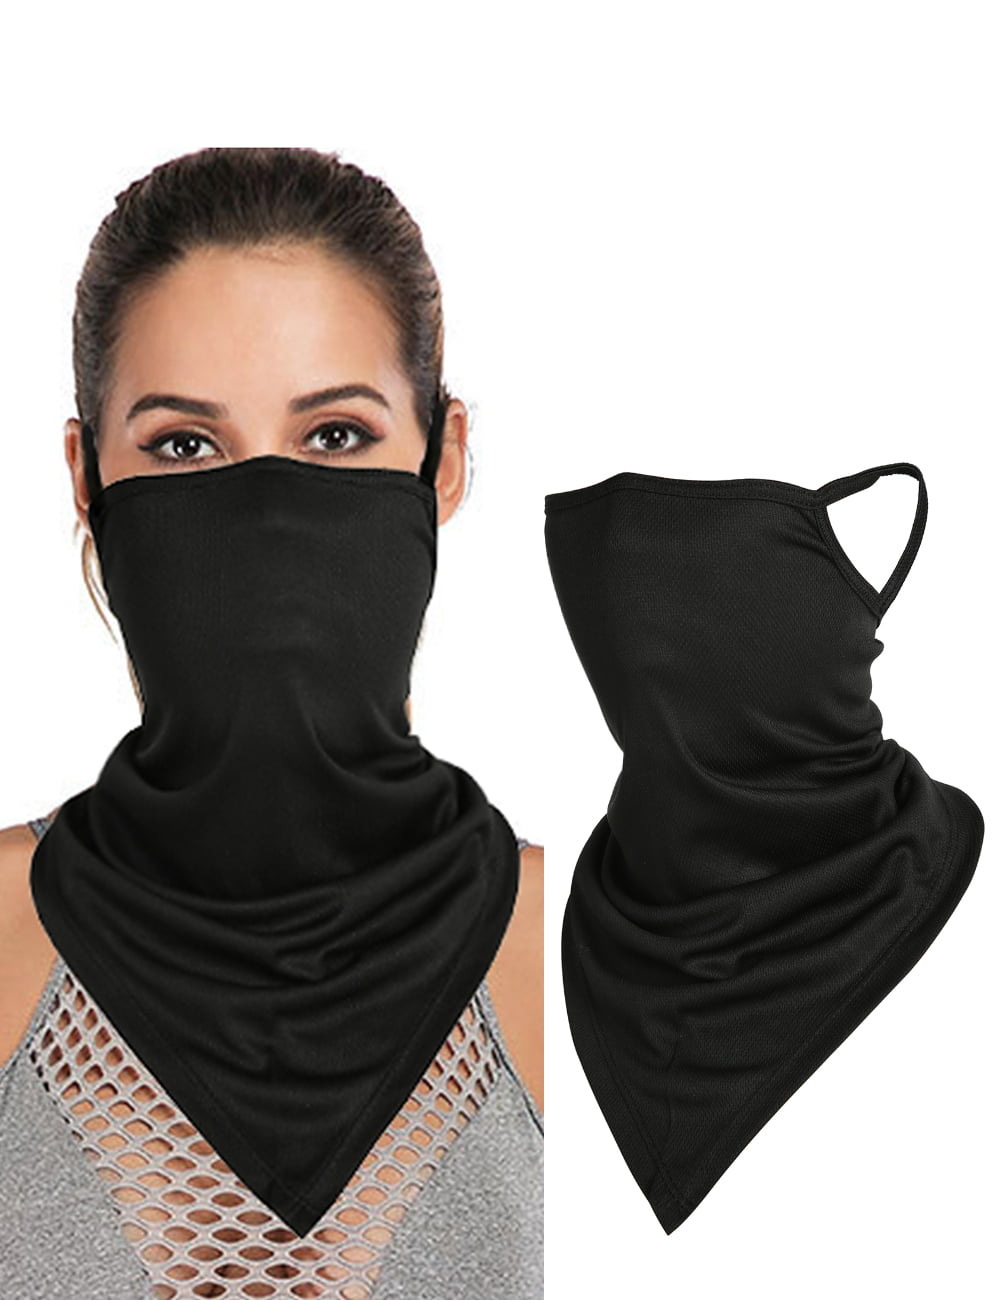 Face Mask Bandana Reusable Breathable Washable with Loops Ear Cover Neck Gaiter 